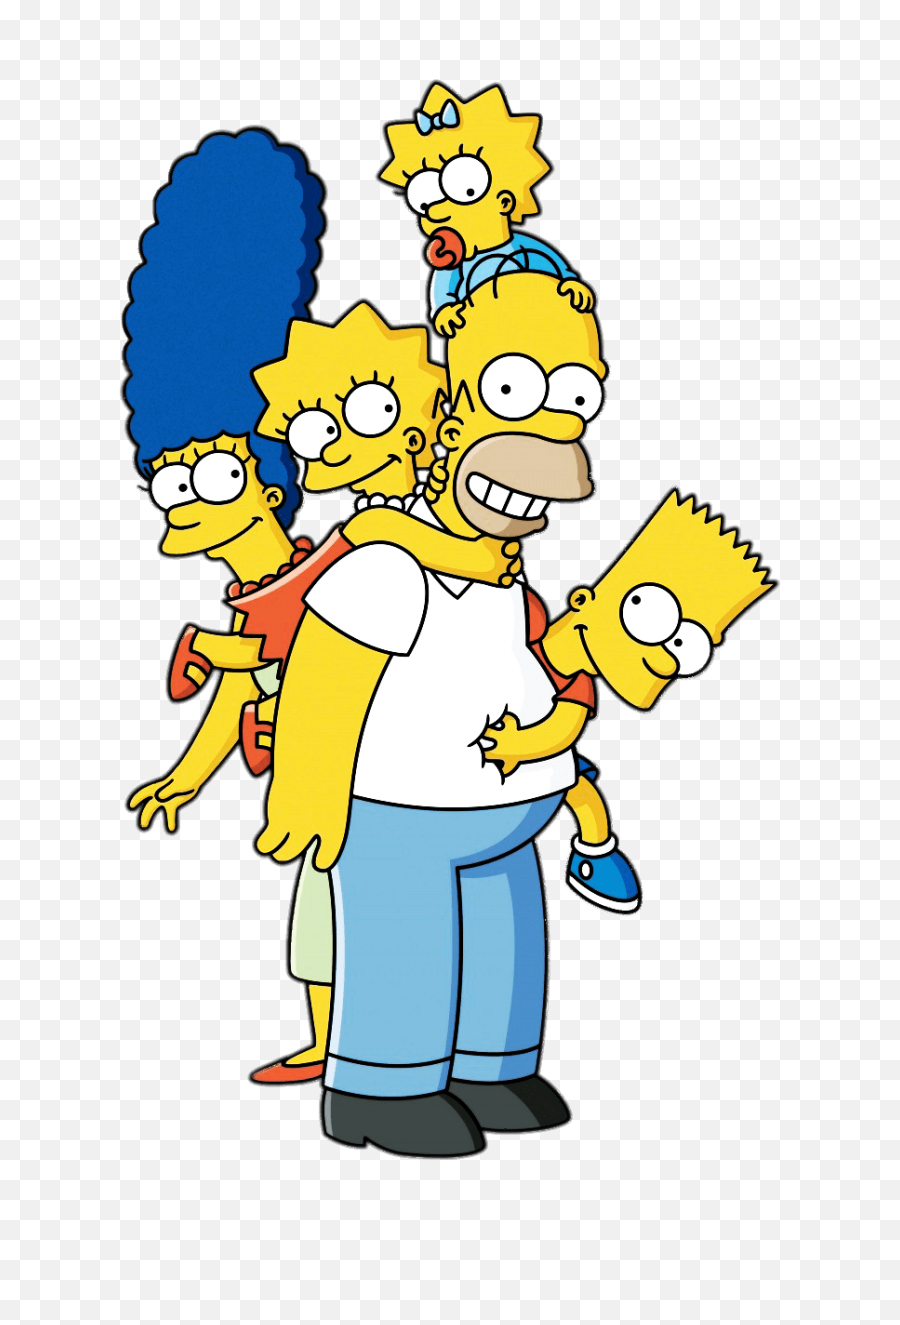 Download Free Png The Simpsons File - Simpsons Png,The Simpsons Png